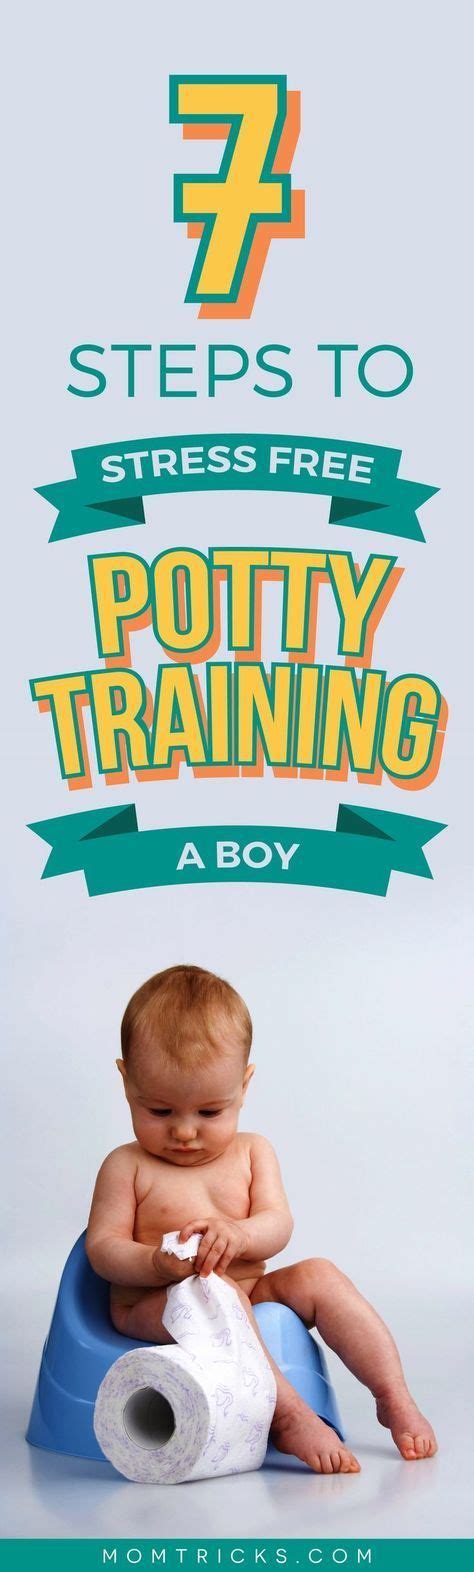 With These 7 Guaranteed Tips To Potty Train A Boy Youll Have Him